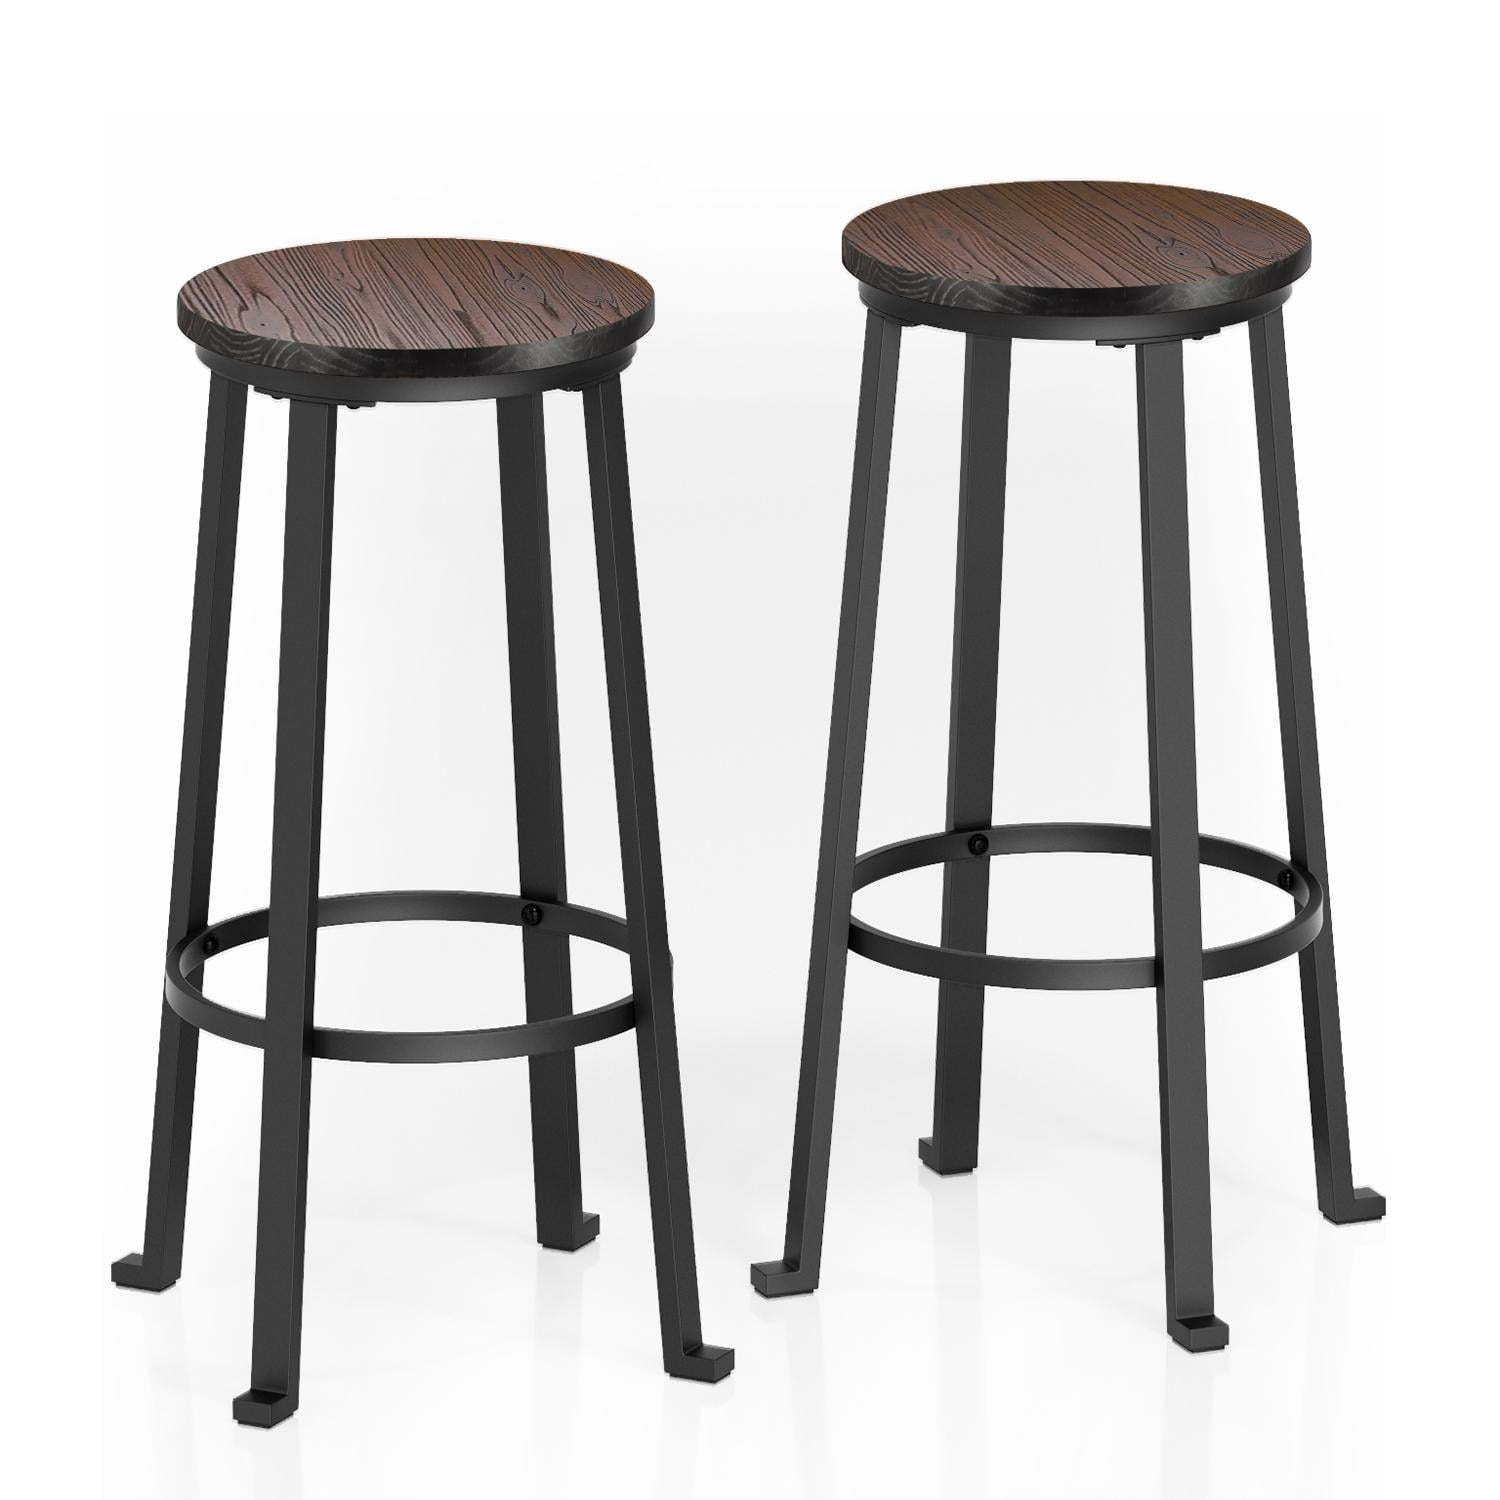 Rustic Steel Bar Stools Barstool, What Is The Diameter Of A Bar Stool